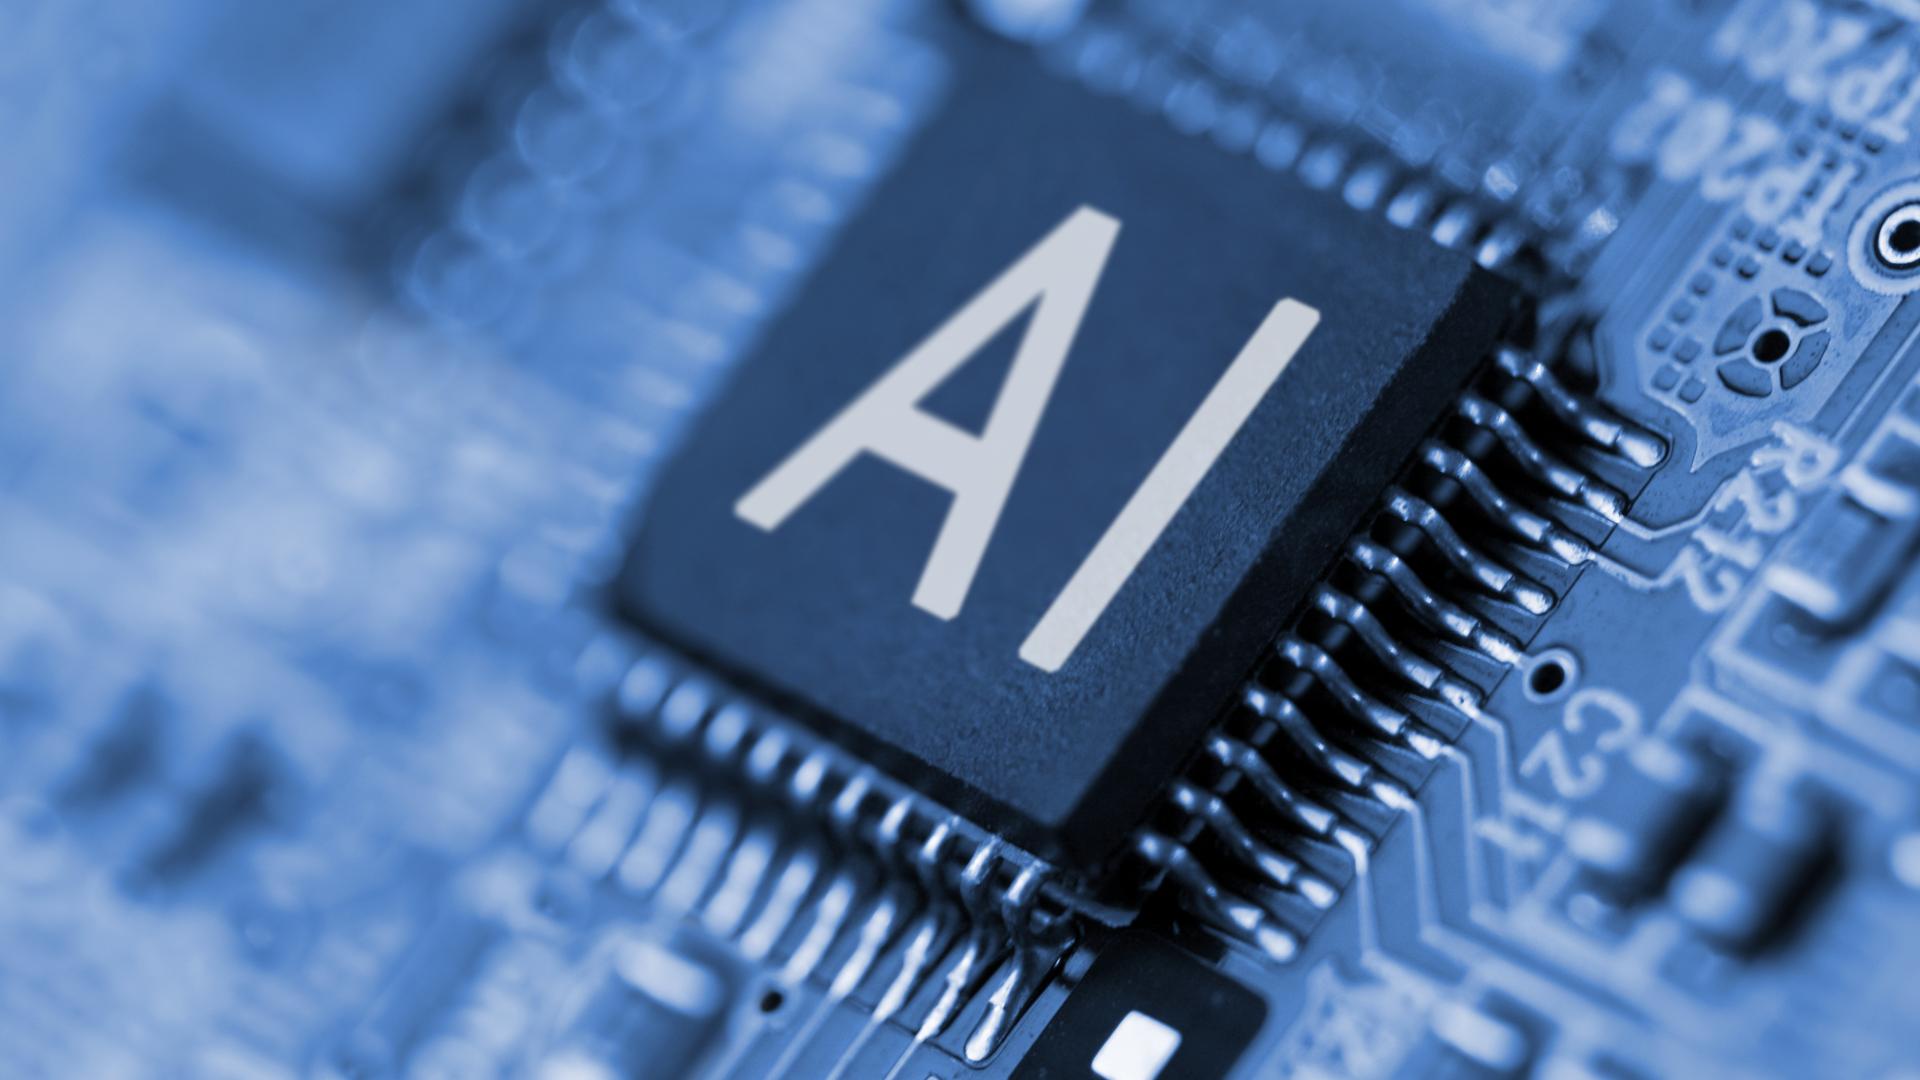 Thinking DEEP to ensure AI delivers the greatest impact | United Nations Development Programme